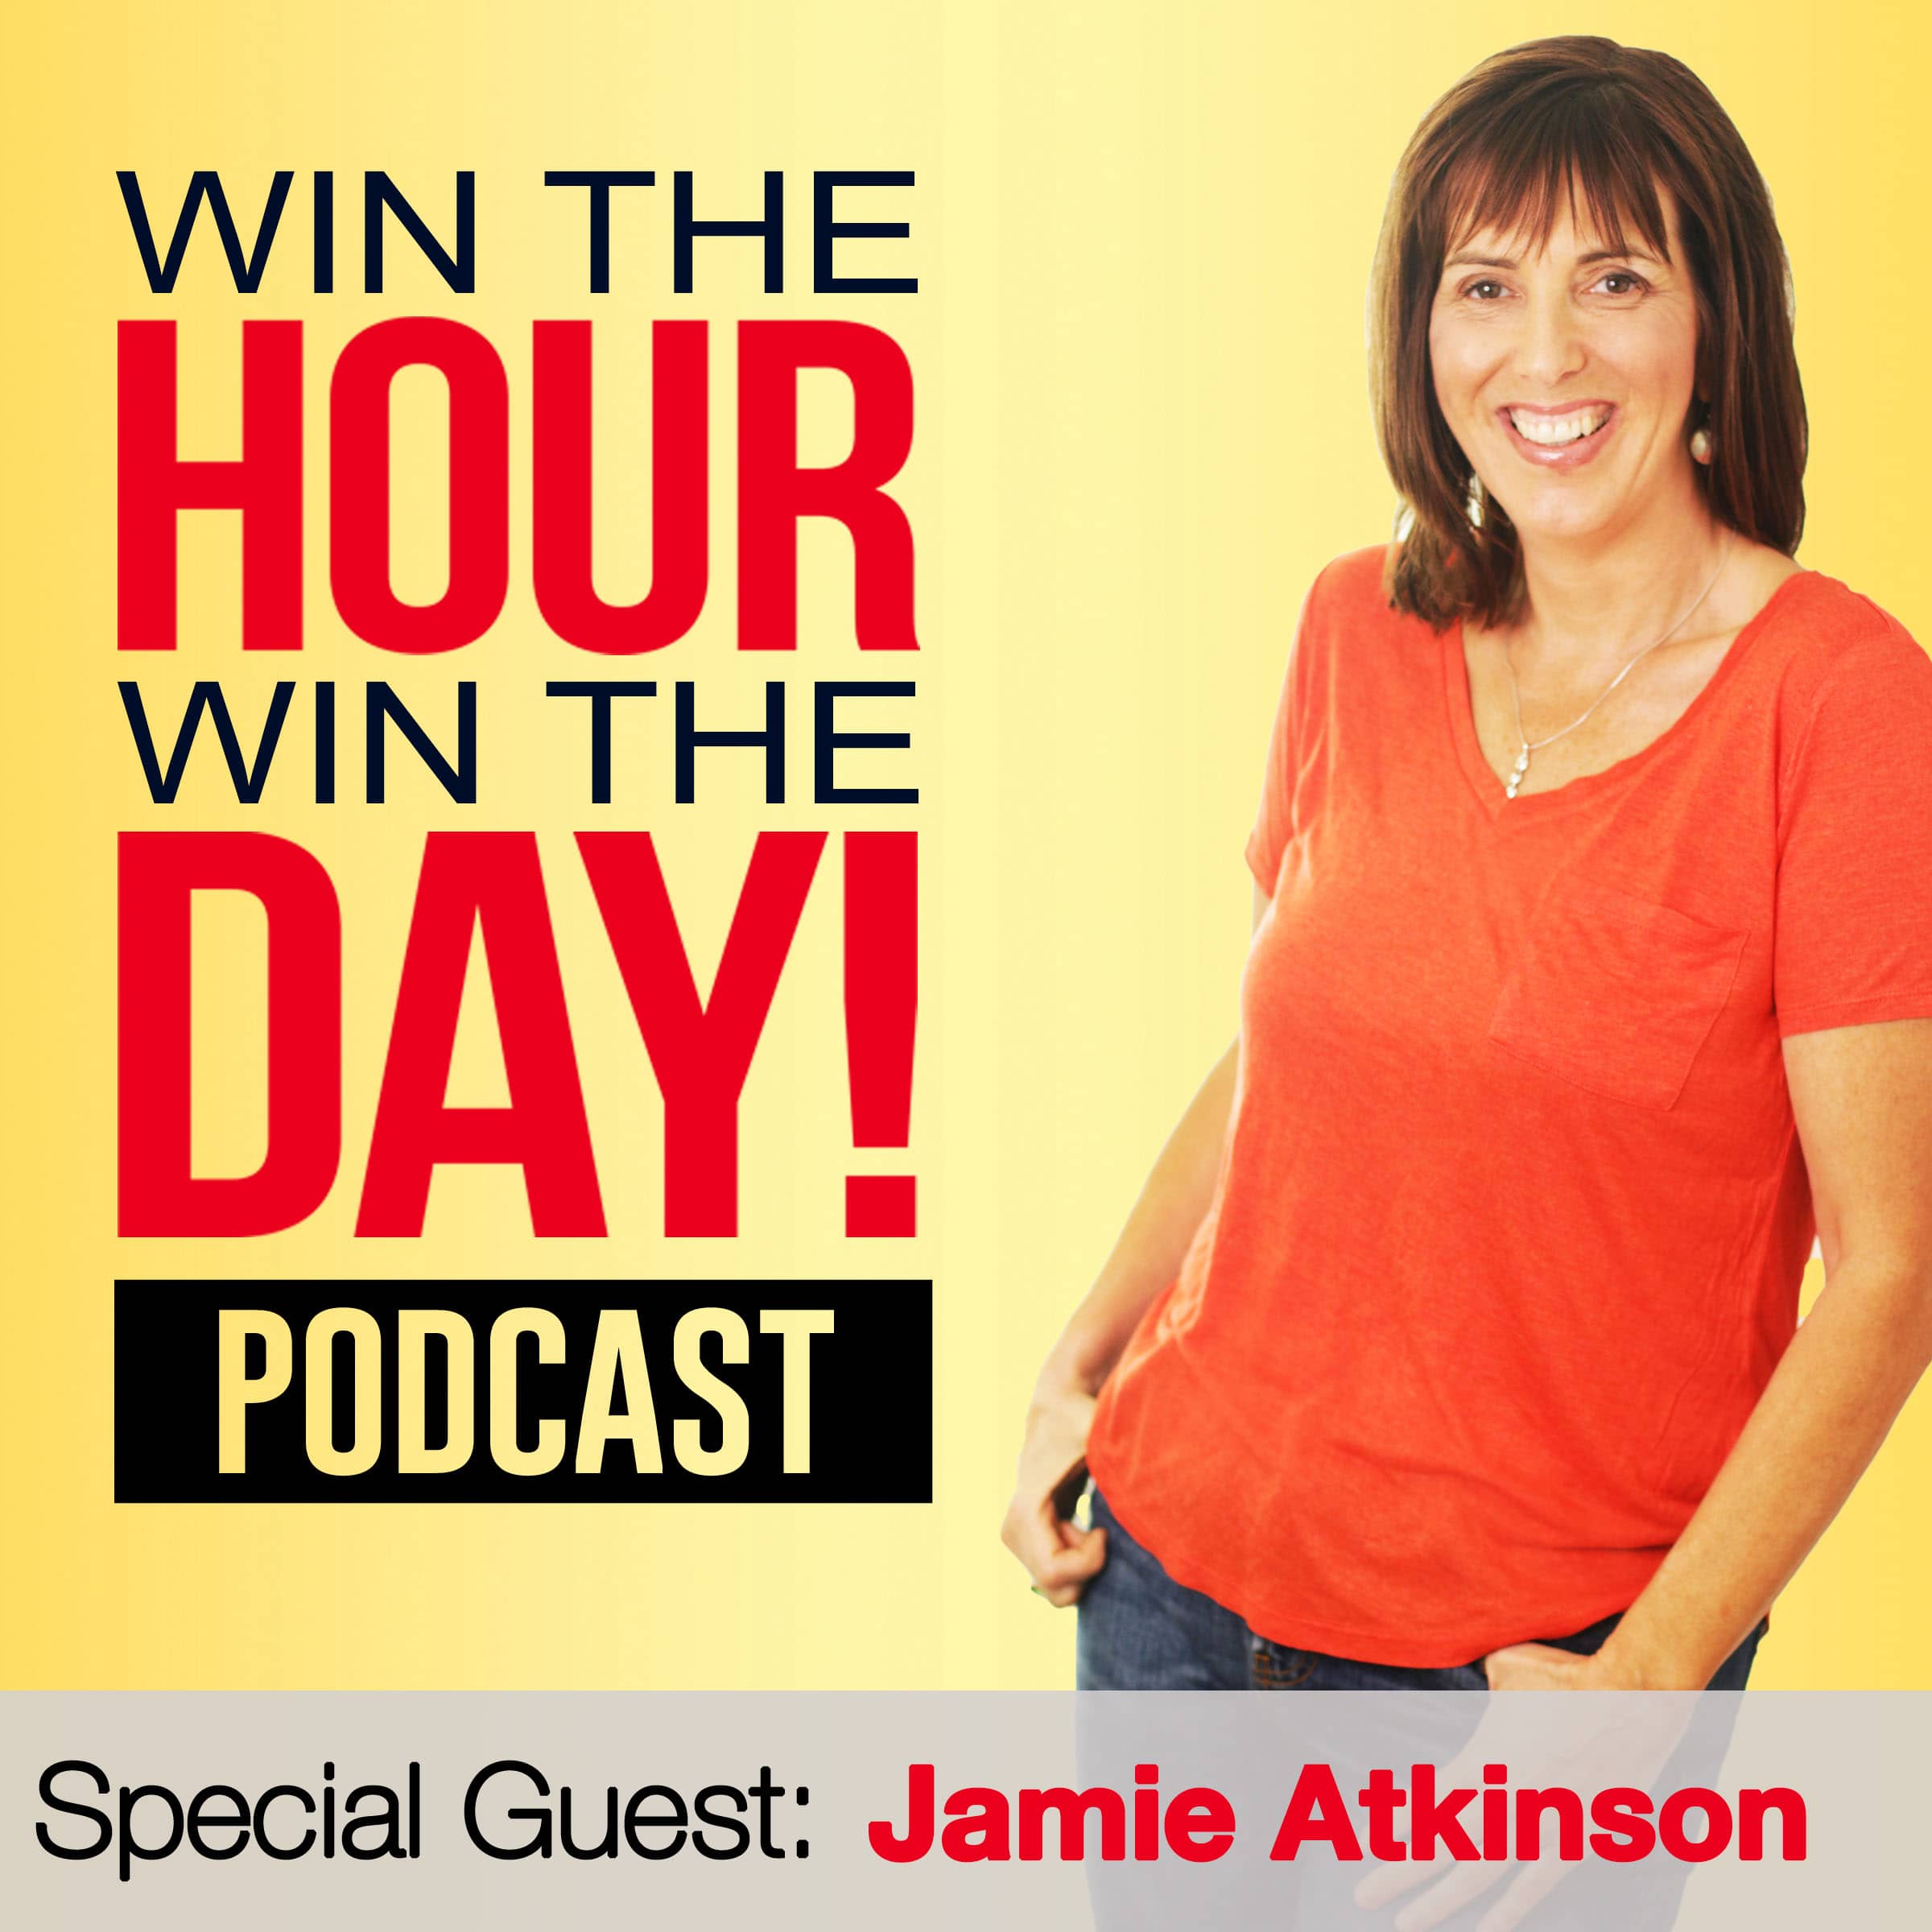 How To Get People’s Attention And Make Money! With Jamie Atkinson